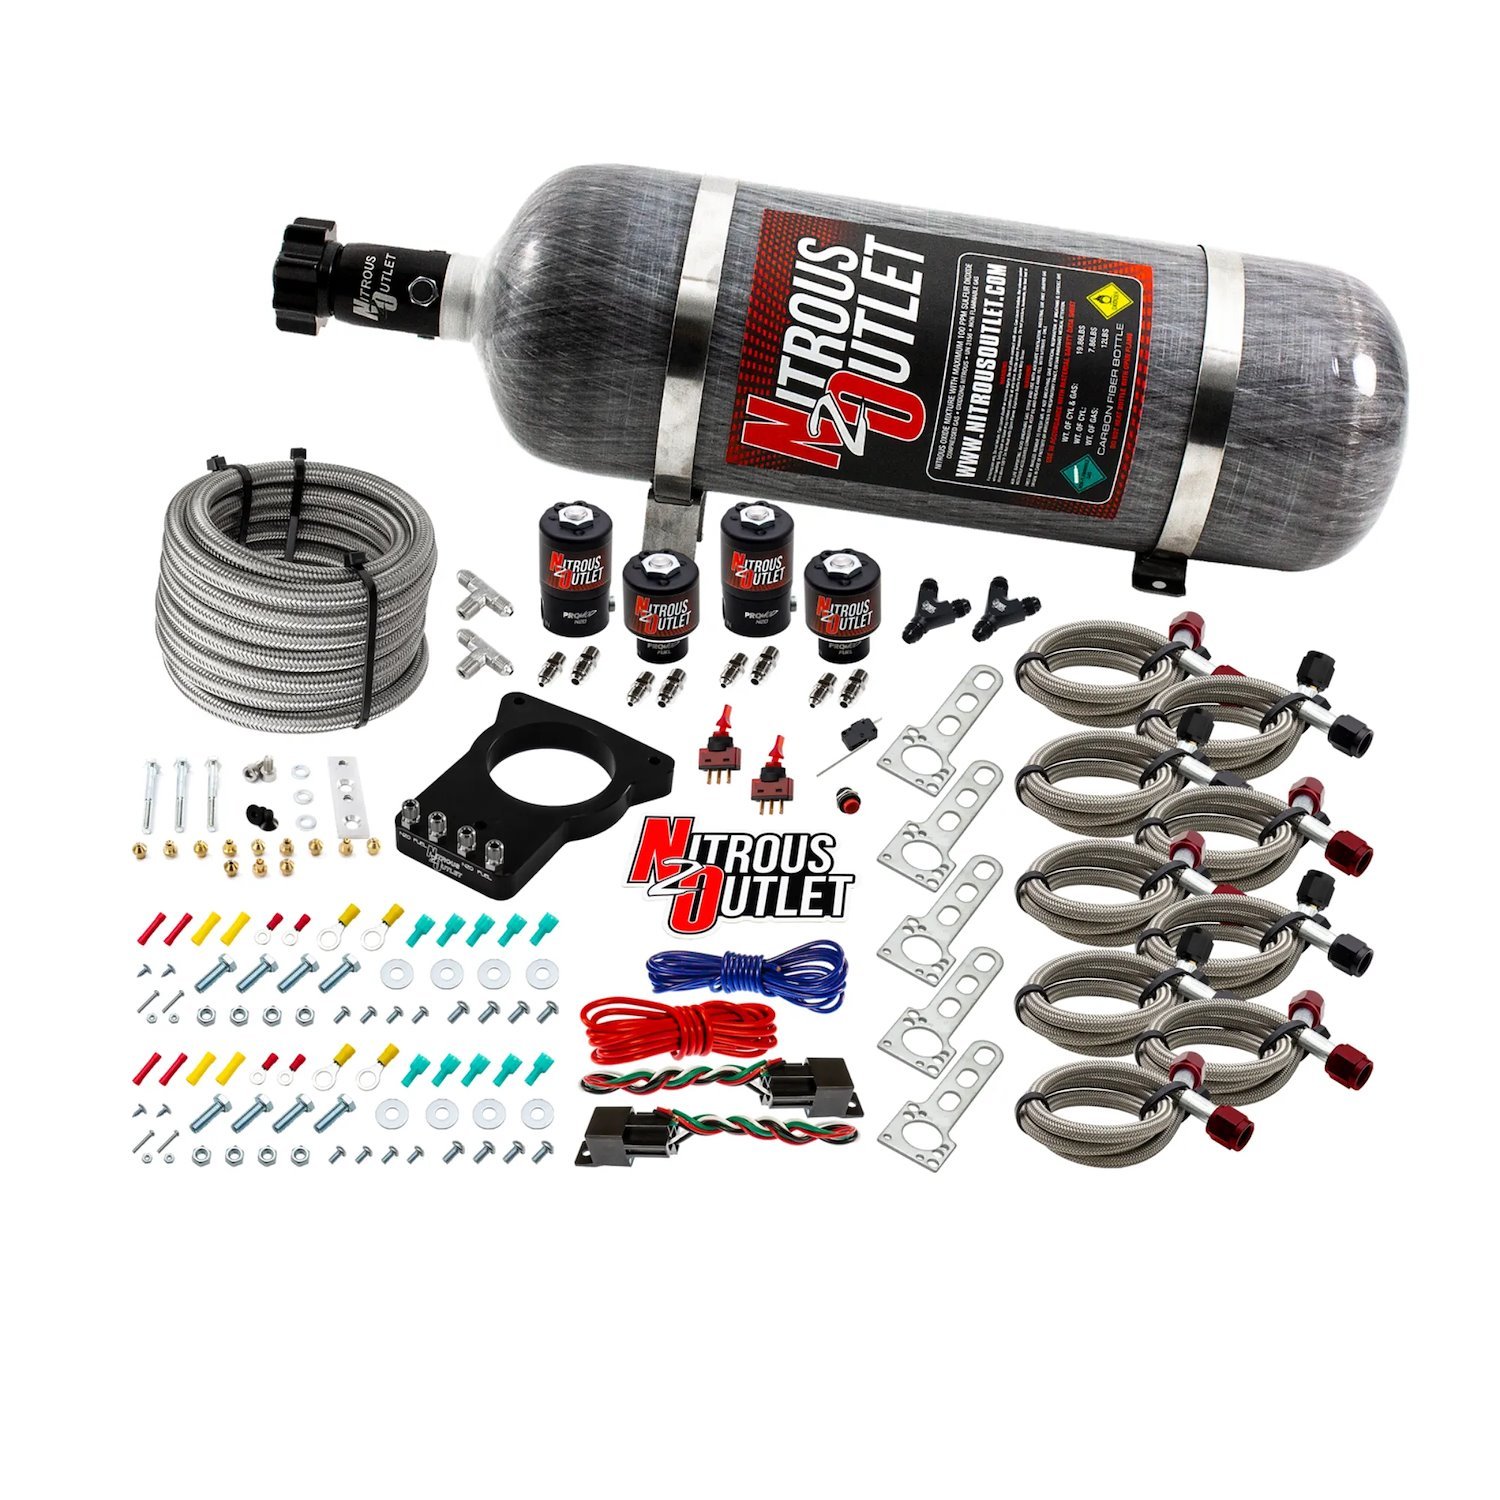 00-10103-12 GM 78 mm Dual-Stage LSX Plate System, Gas/E85, 5-55psi, 50-200HP, 12lb Bottle